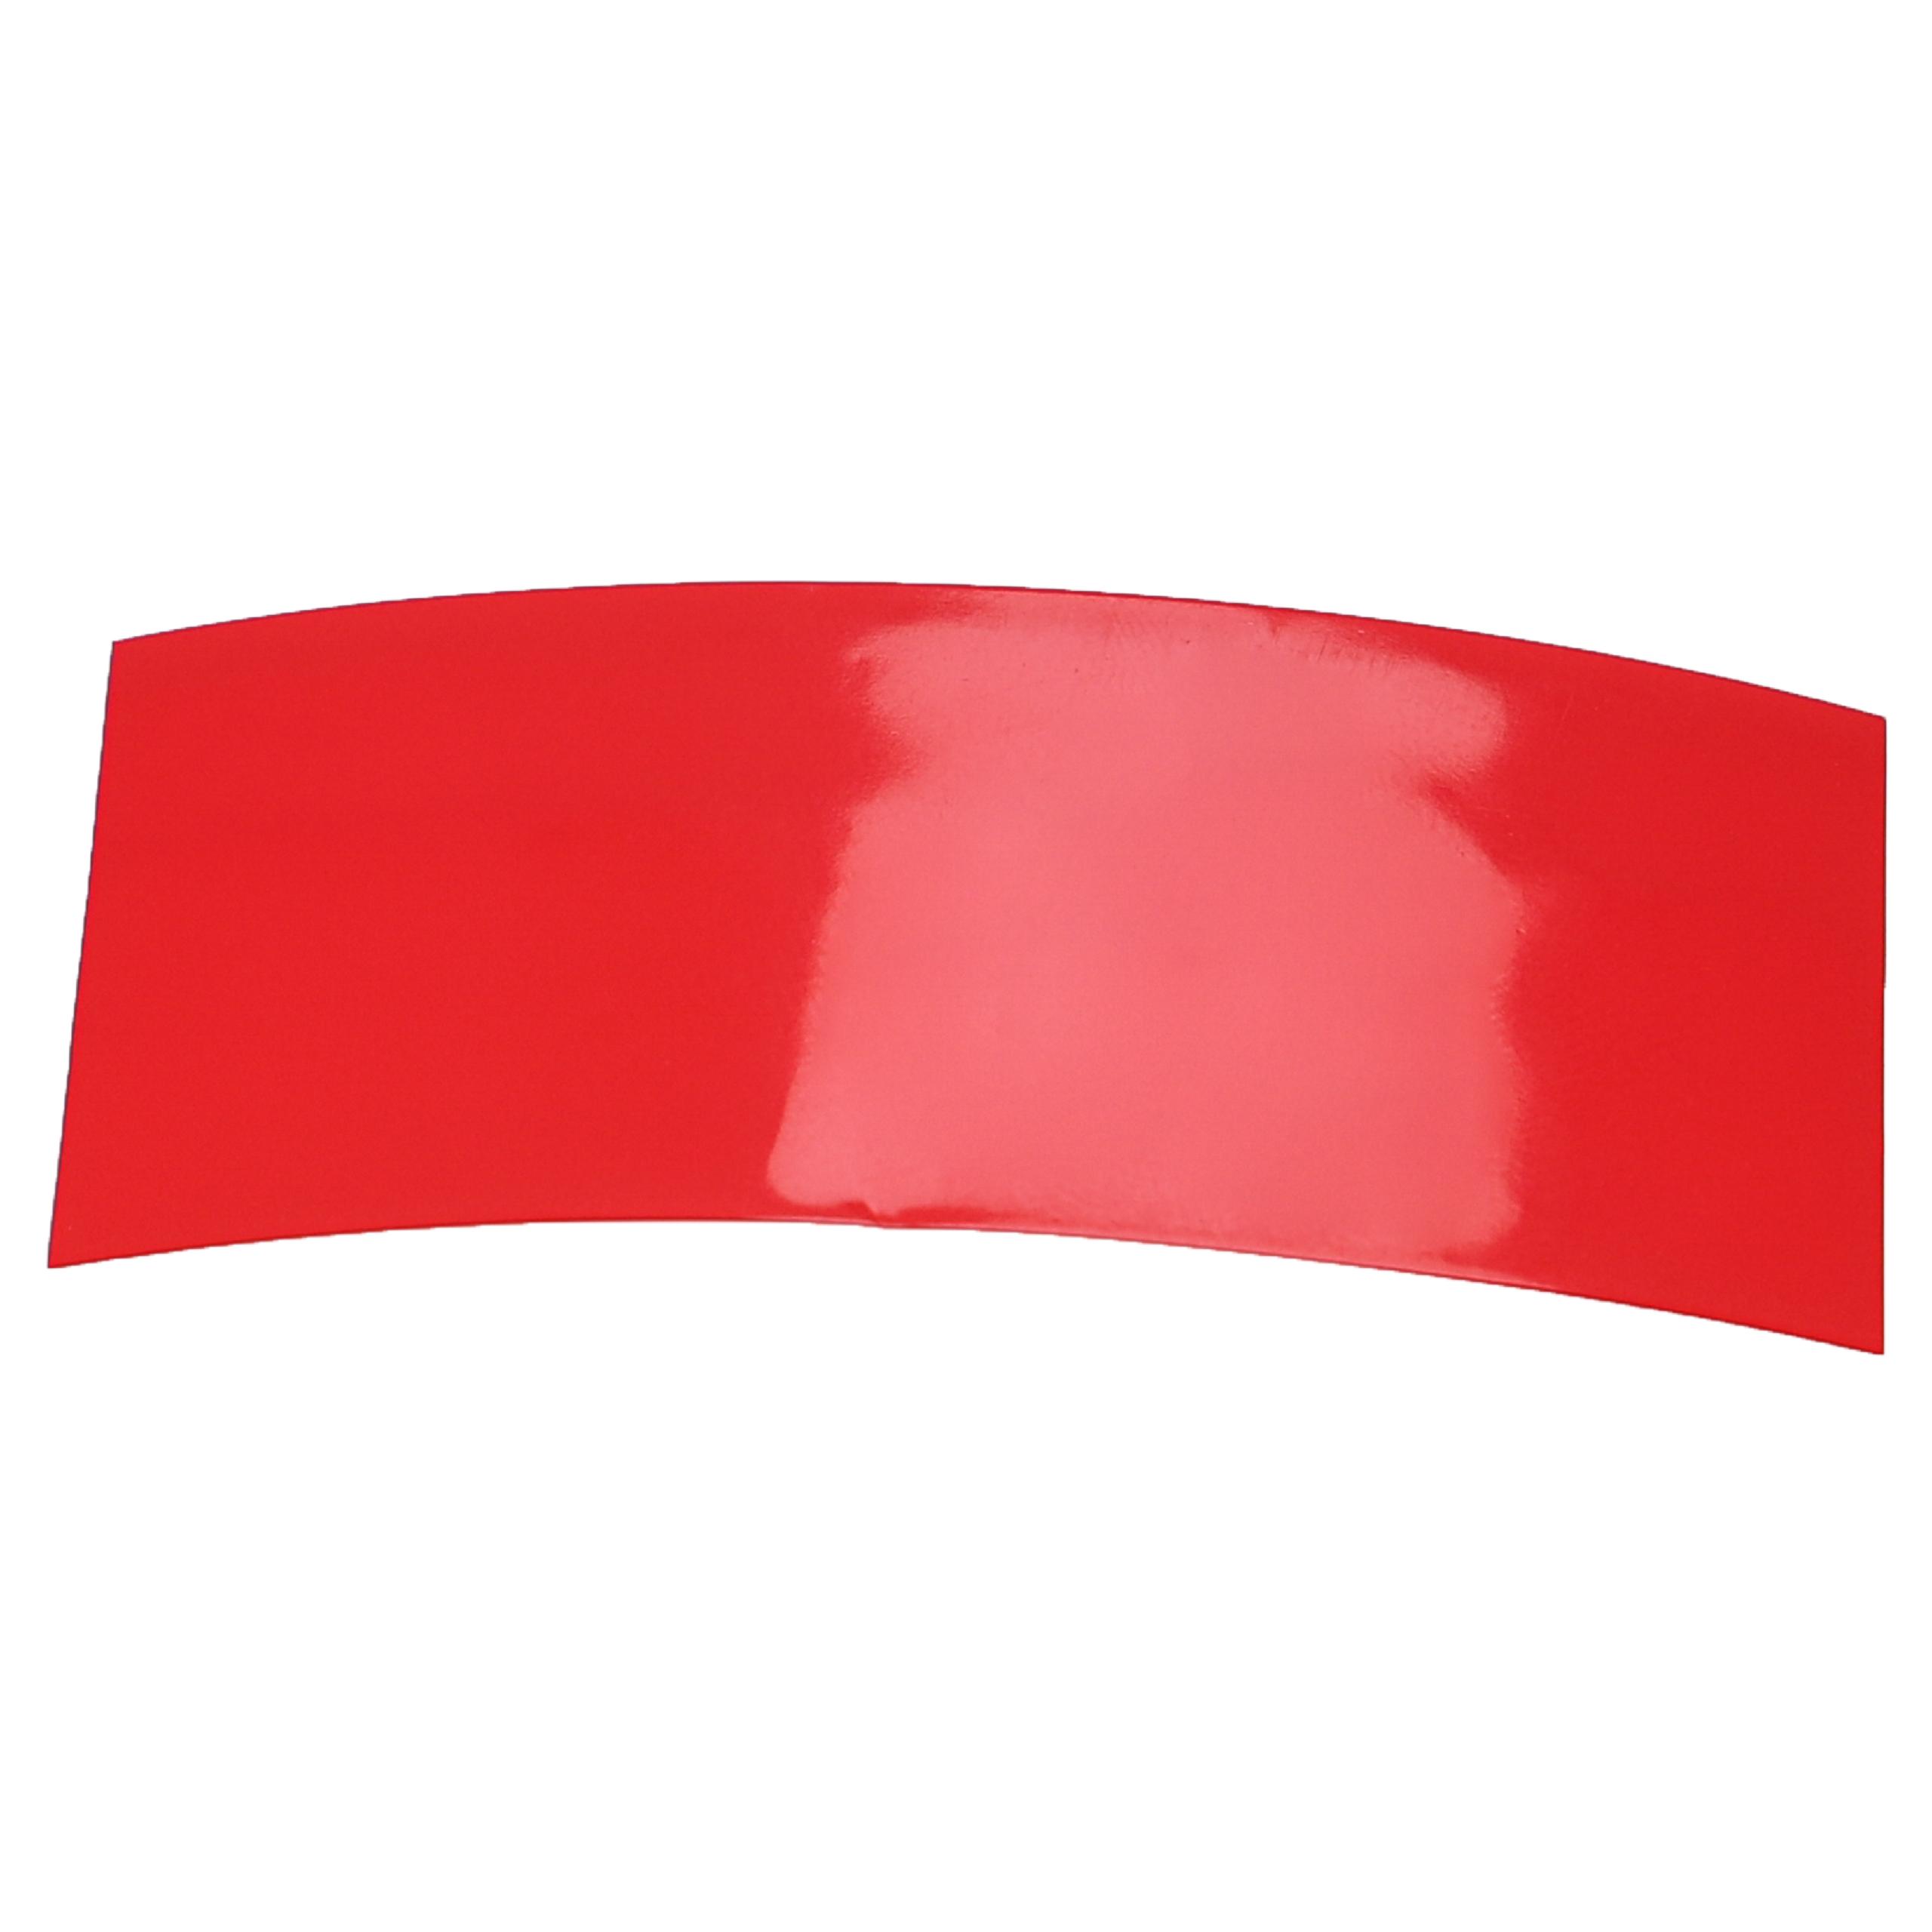 10x Heat Shrink Tubing Suitable for 18650 Battery Cells - Shrink Wrap Red